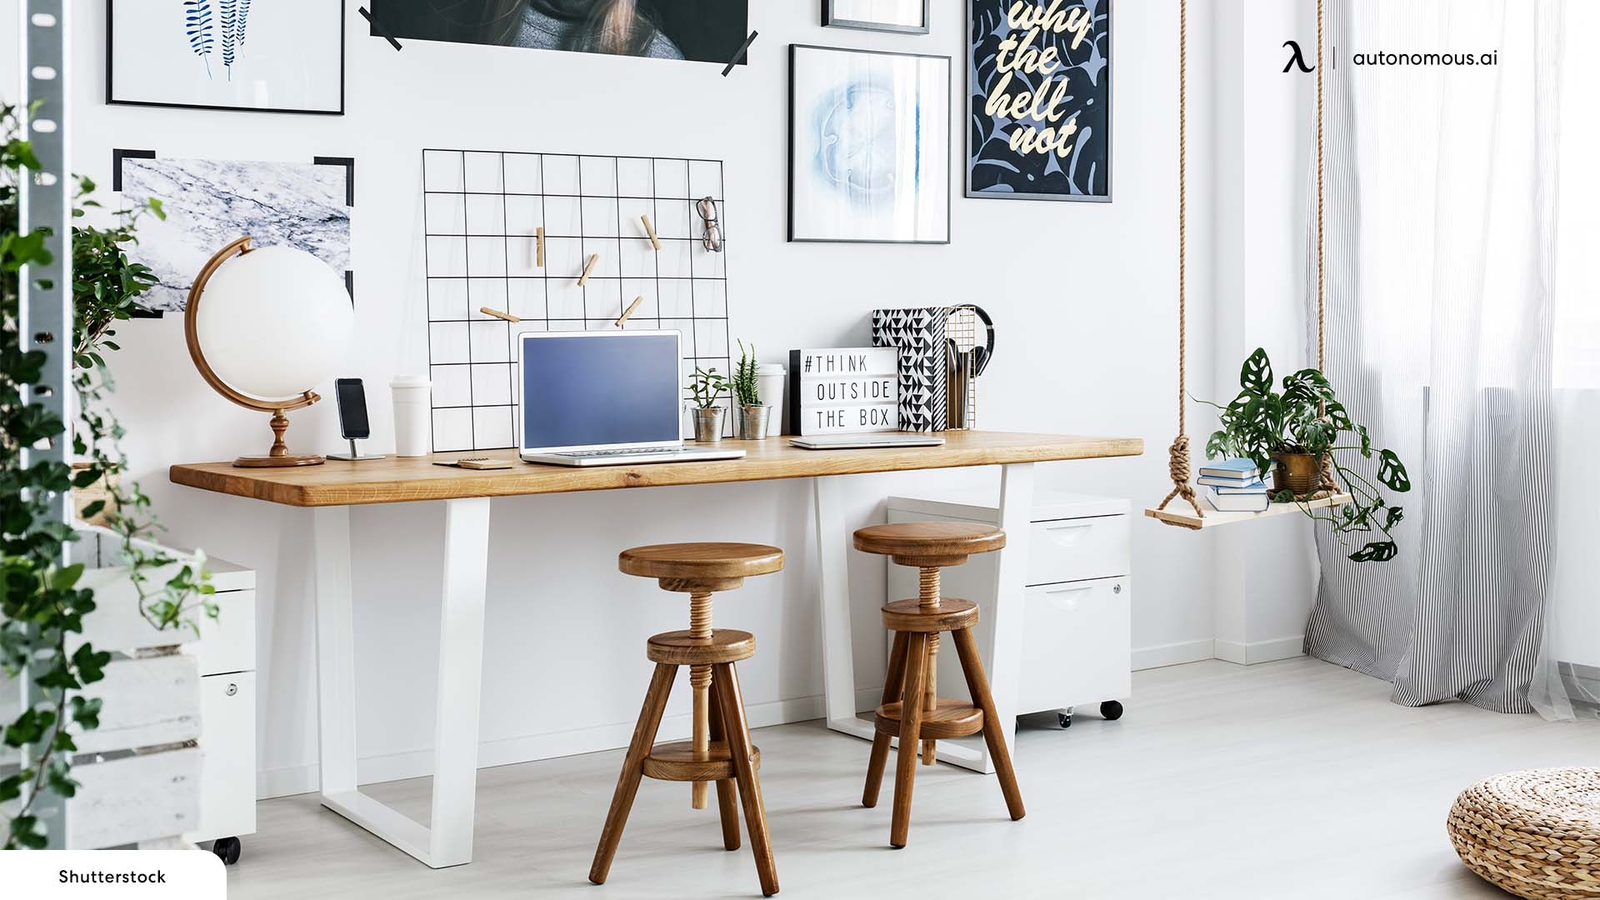 Most Popular Ergonomic Stool Chairs for Your Workspace